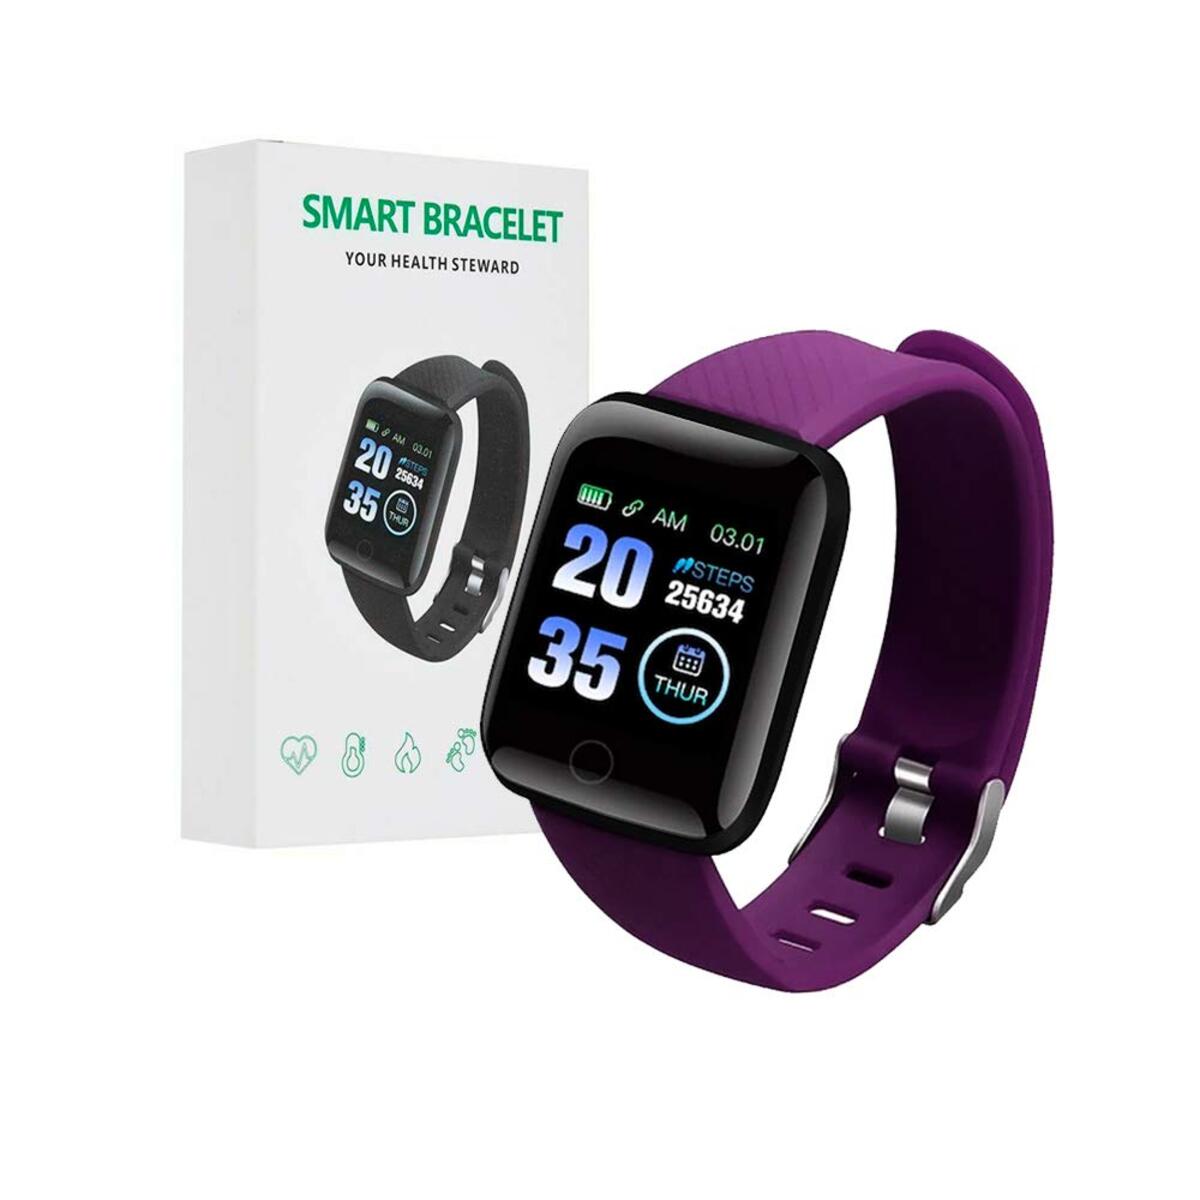 charging-the-your-health-steward-smart-bracelet-quick-guide